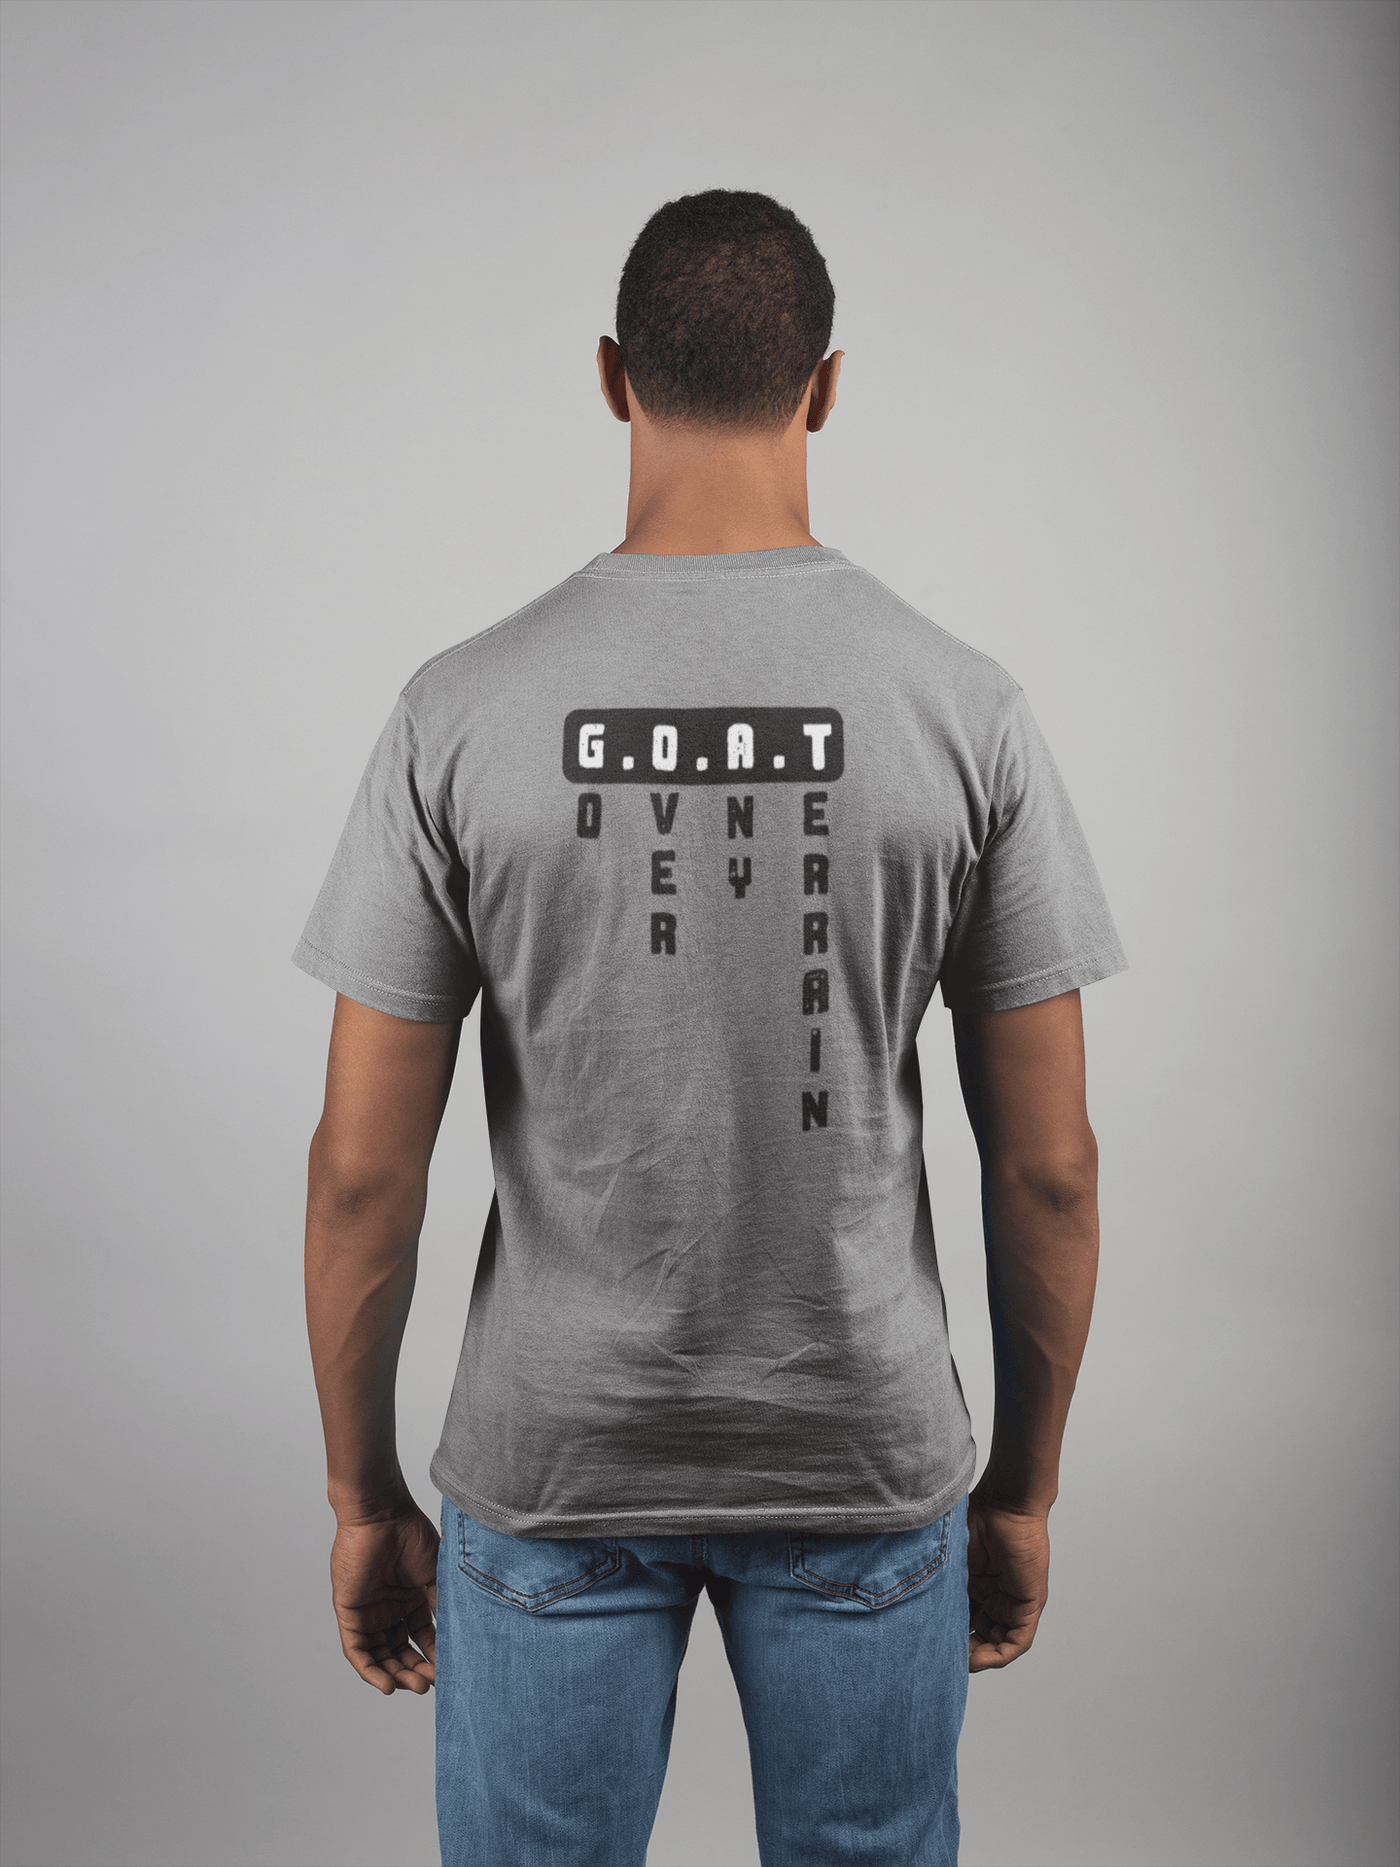 Big and Tall-G.O.A.T. Mode Graphic Tee - Goats Trail